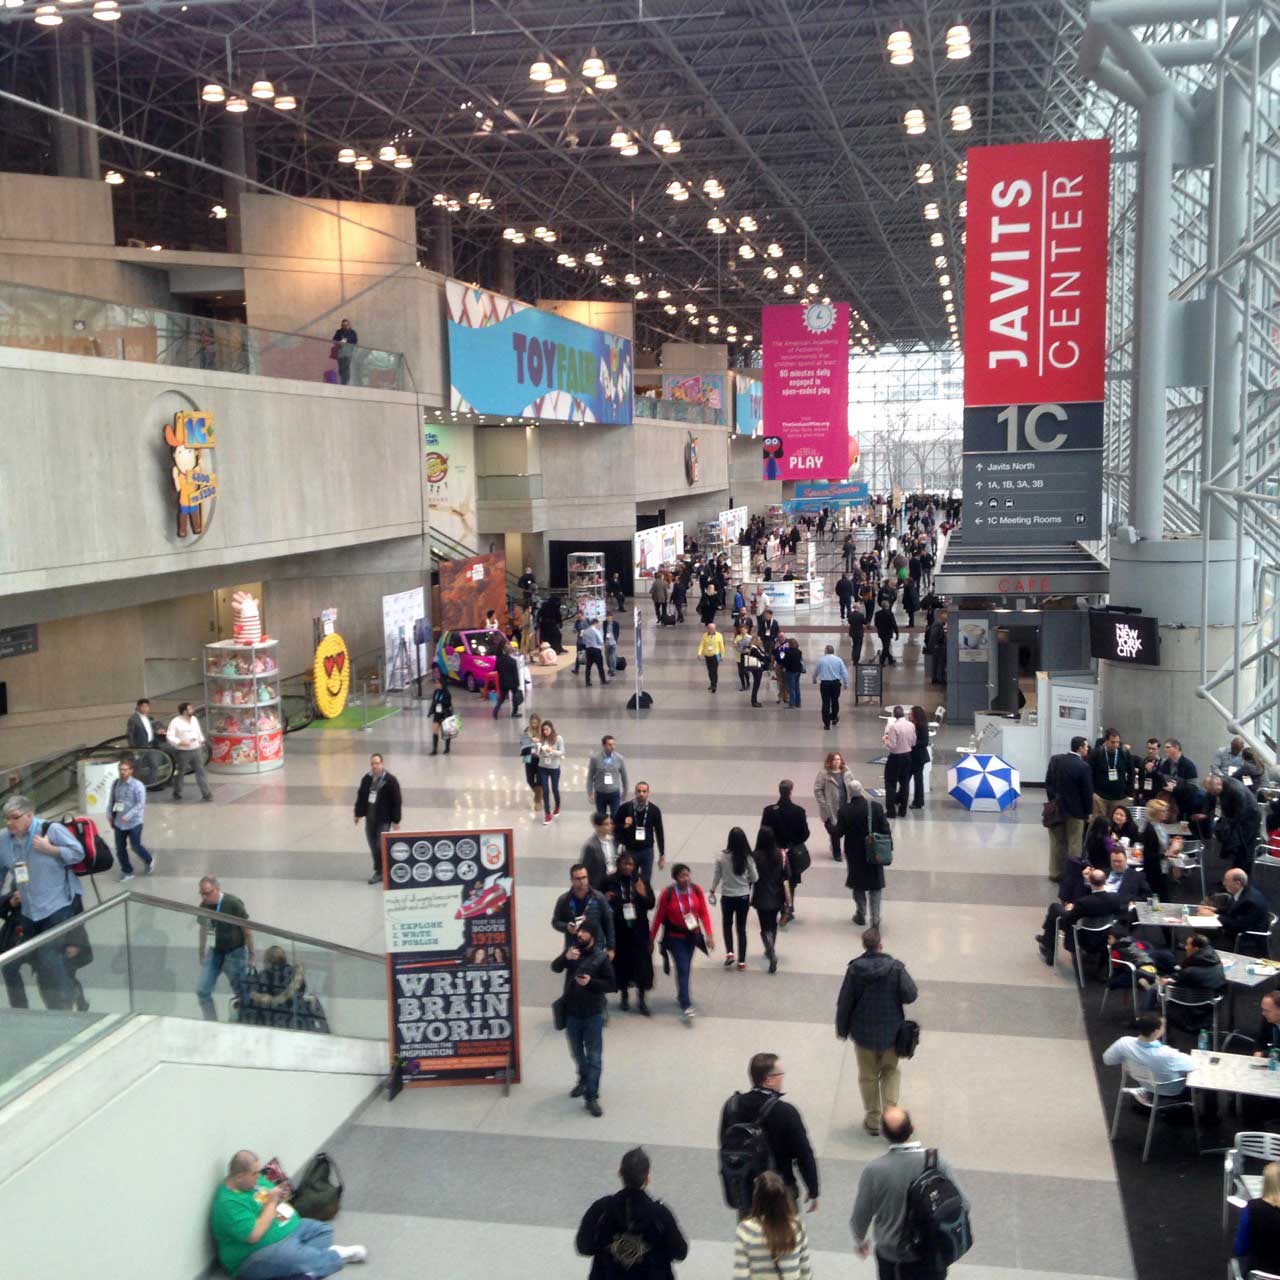 Toy Fair attendance is up compared to 2015